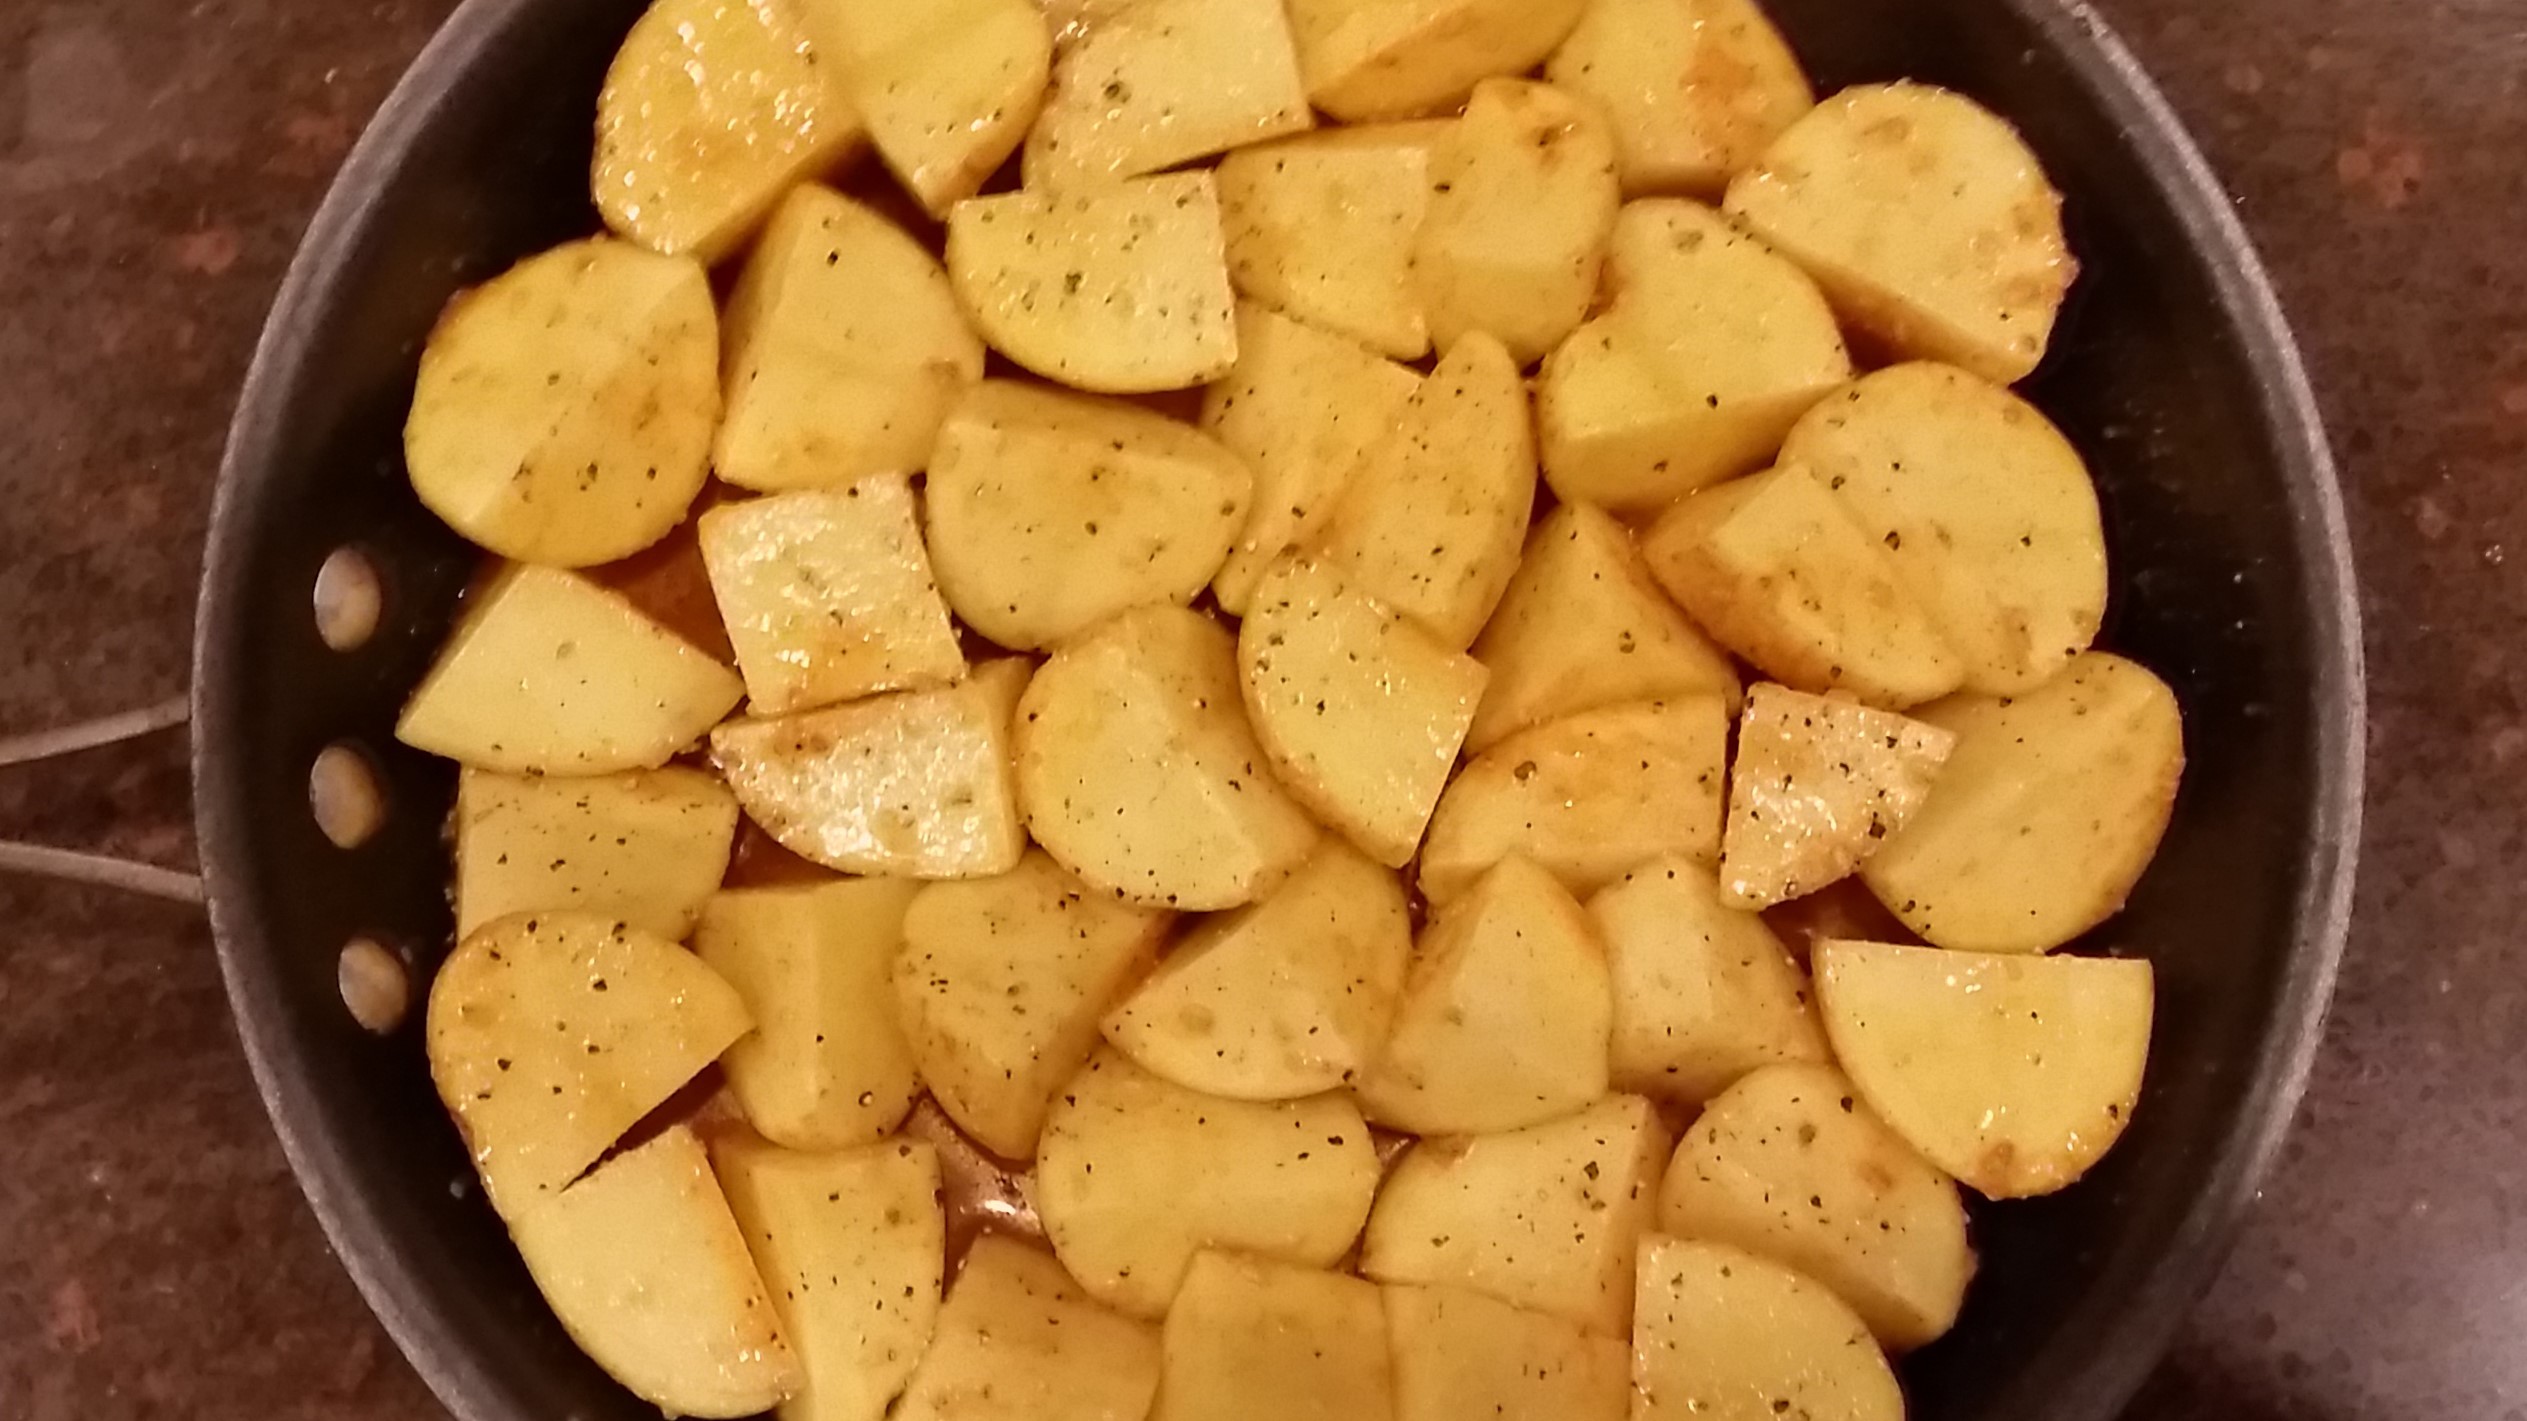 potatoes are marinated and ready for roasting